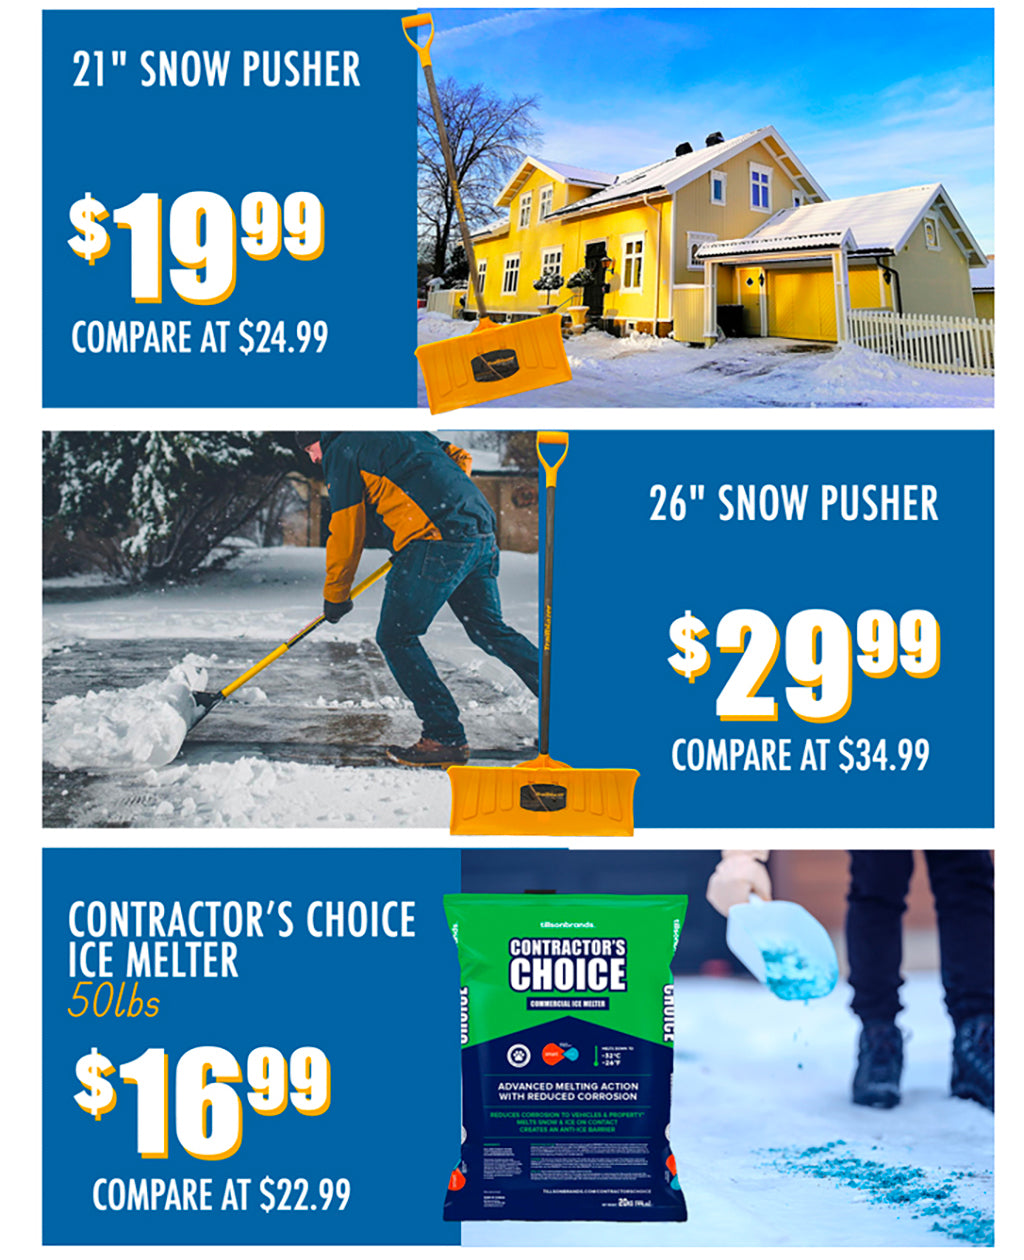 21" SNOW PUSHER €19.99,  26" SNOW PUSHER €29.99,  CONTRACTOR'S CHOICE ICE MELTER  €16.99